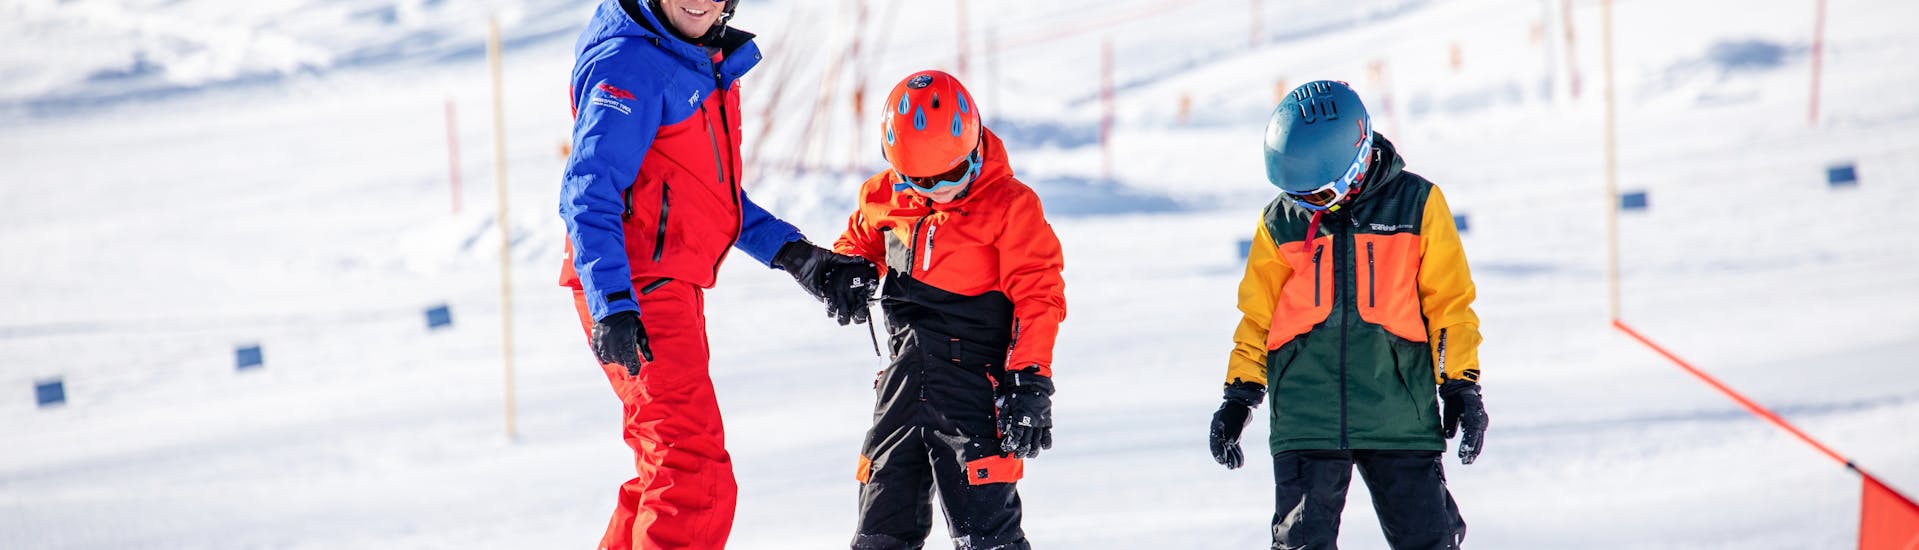 Snowboarders ride fast down the slopes in snowboard lessons for kids & adults - All levels.